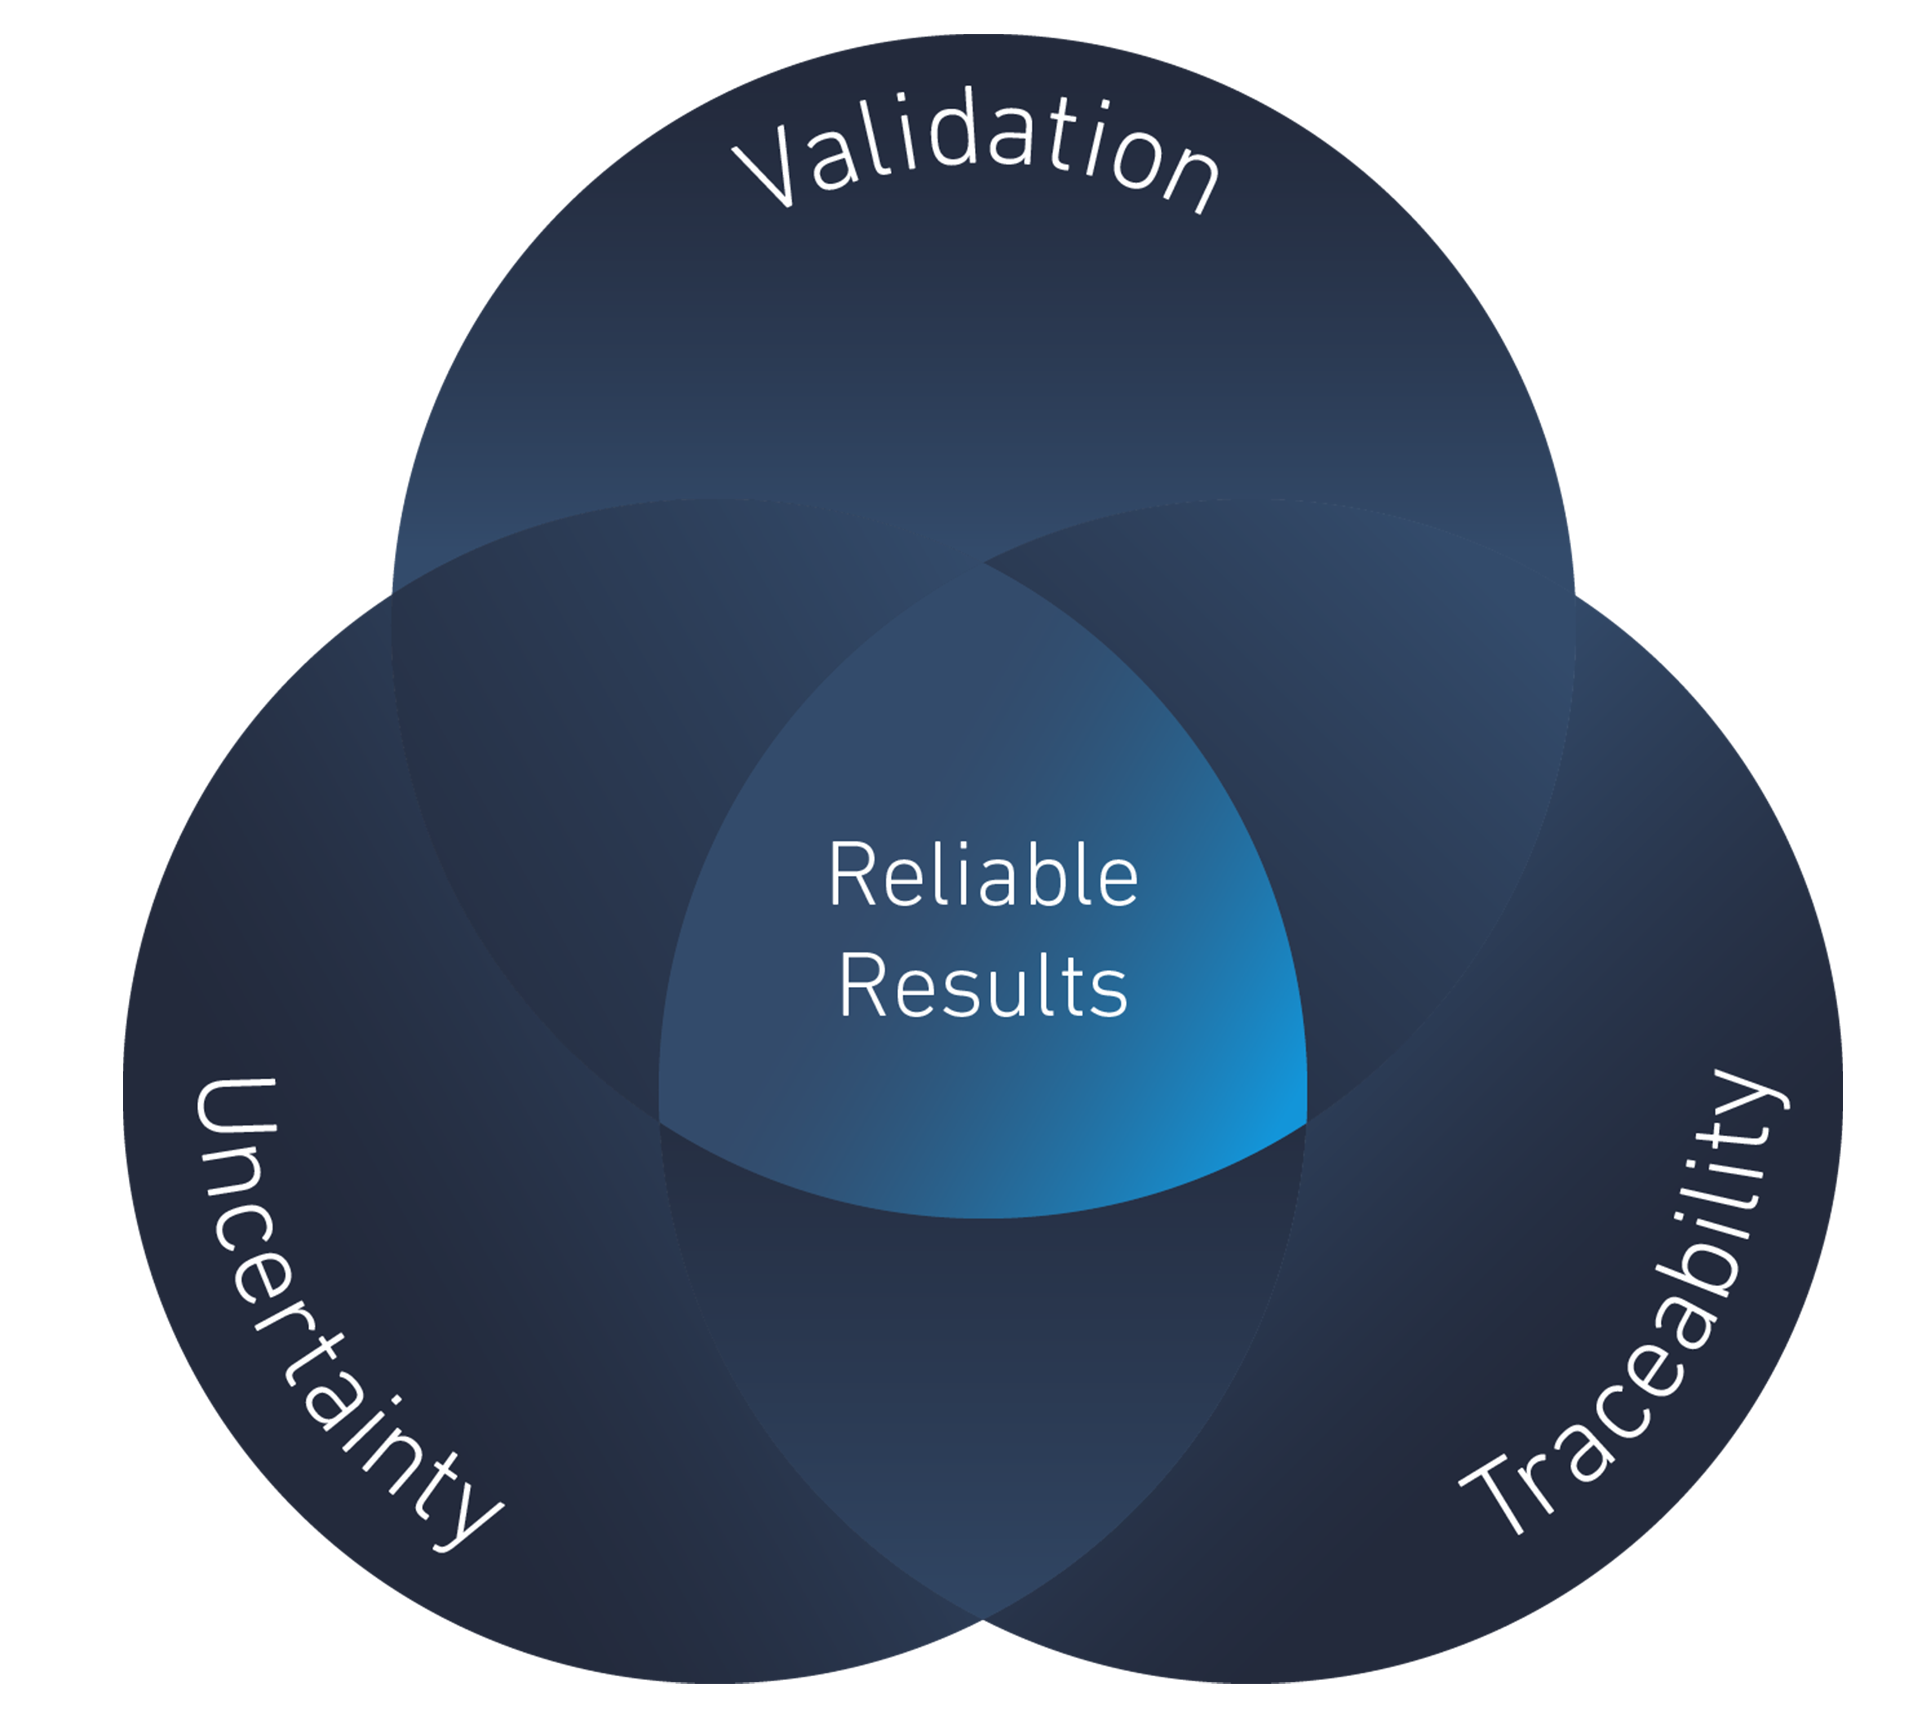 Illustration consisting of 3 cornerstones (Validation, Uncertainty and Traceability) which all have something in common, which is in the middle (reliable results).